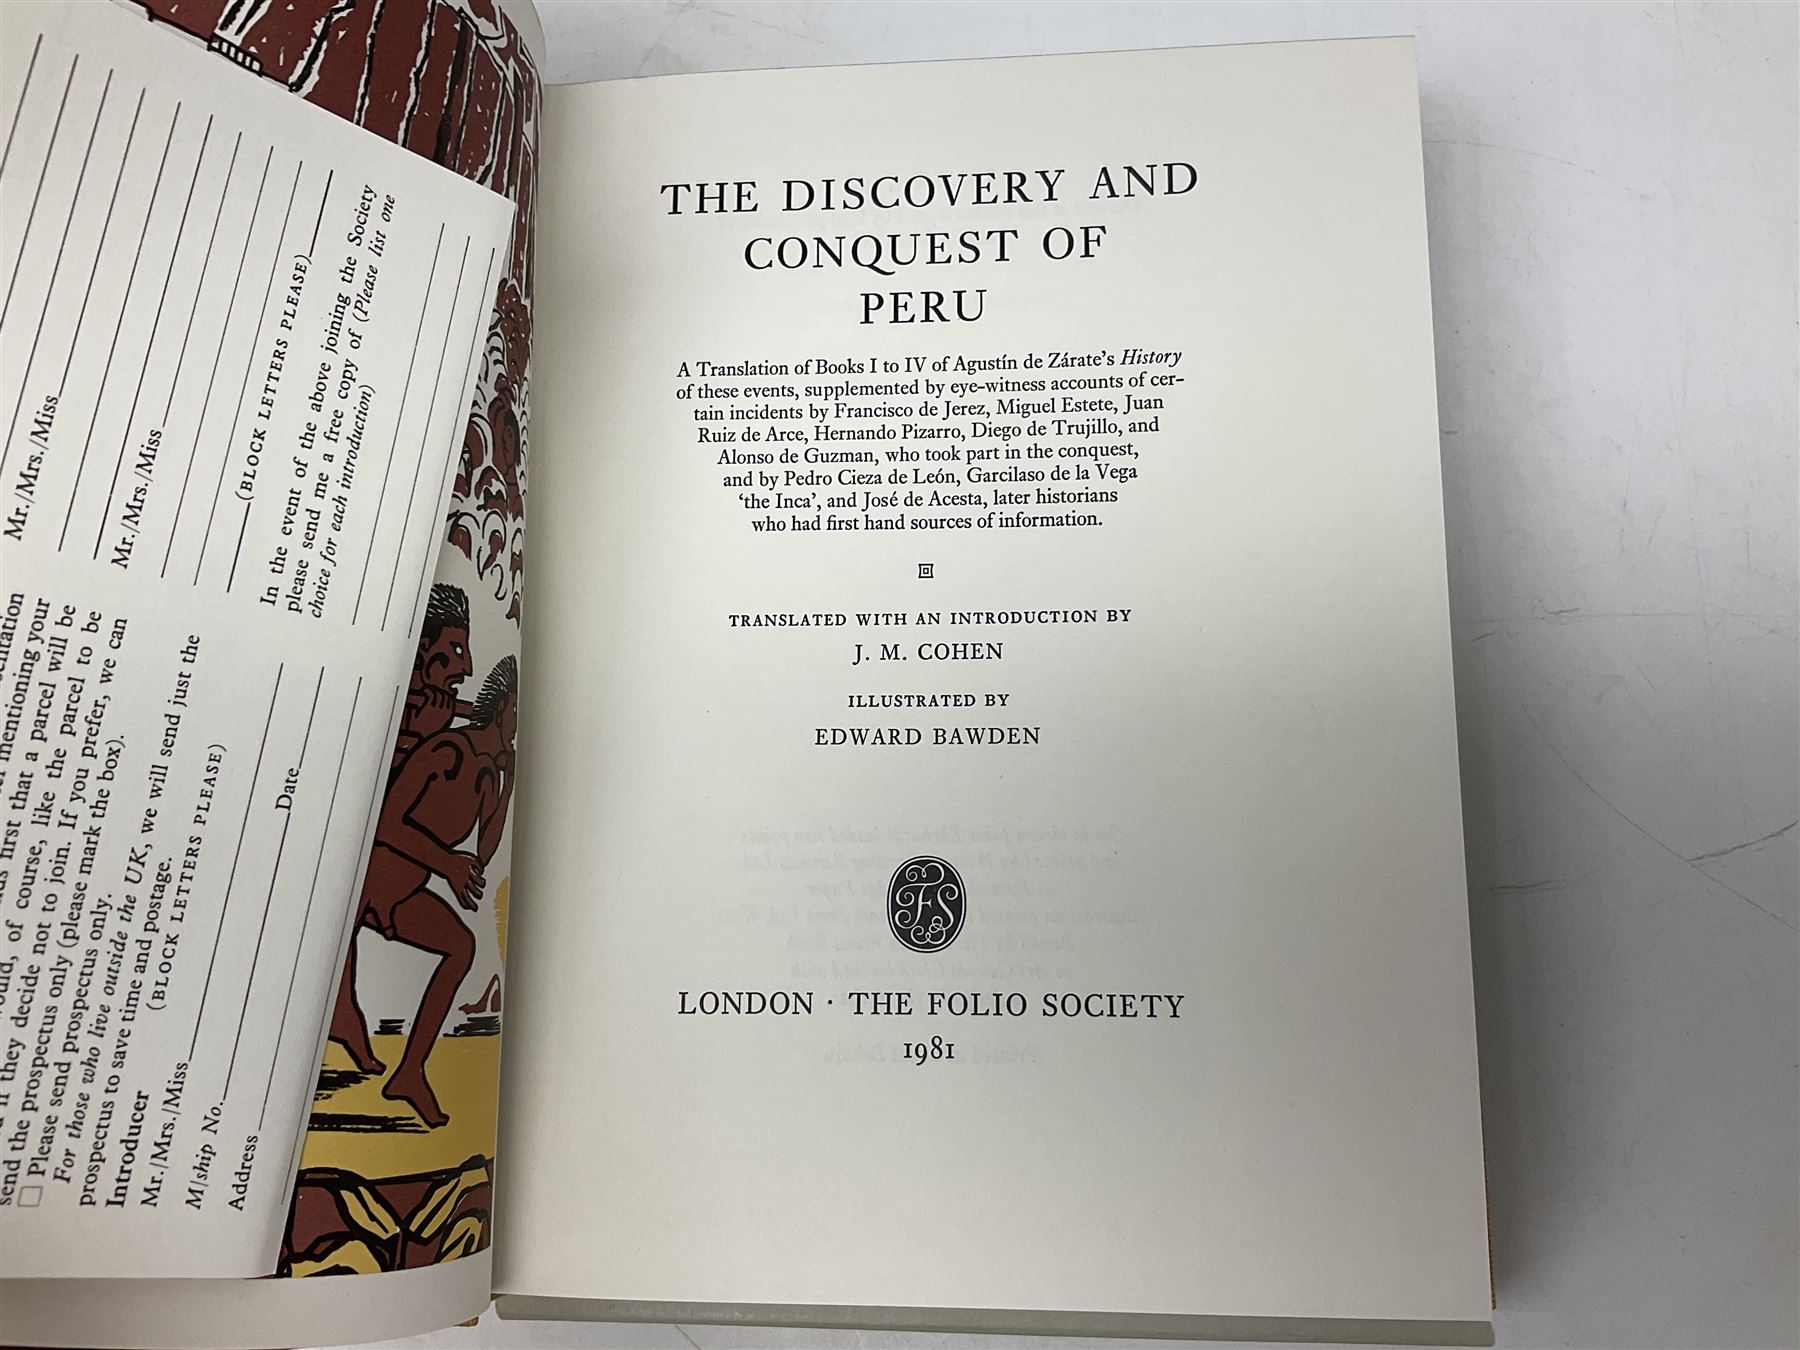 Folio Society - nineteen volumes including The Discovery and Conquest of Peru - Image 18 of 19